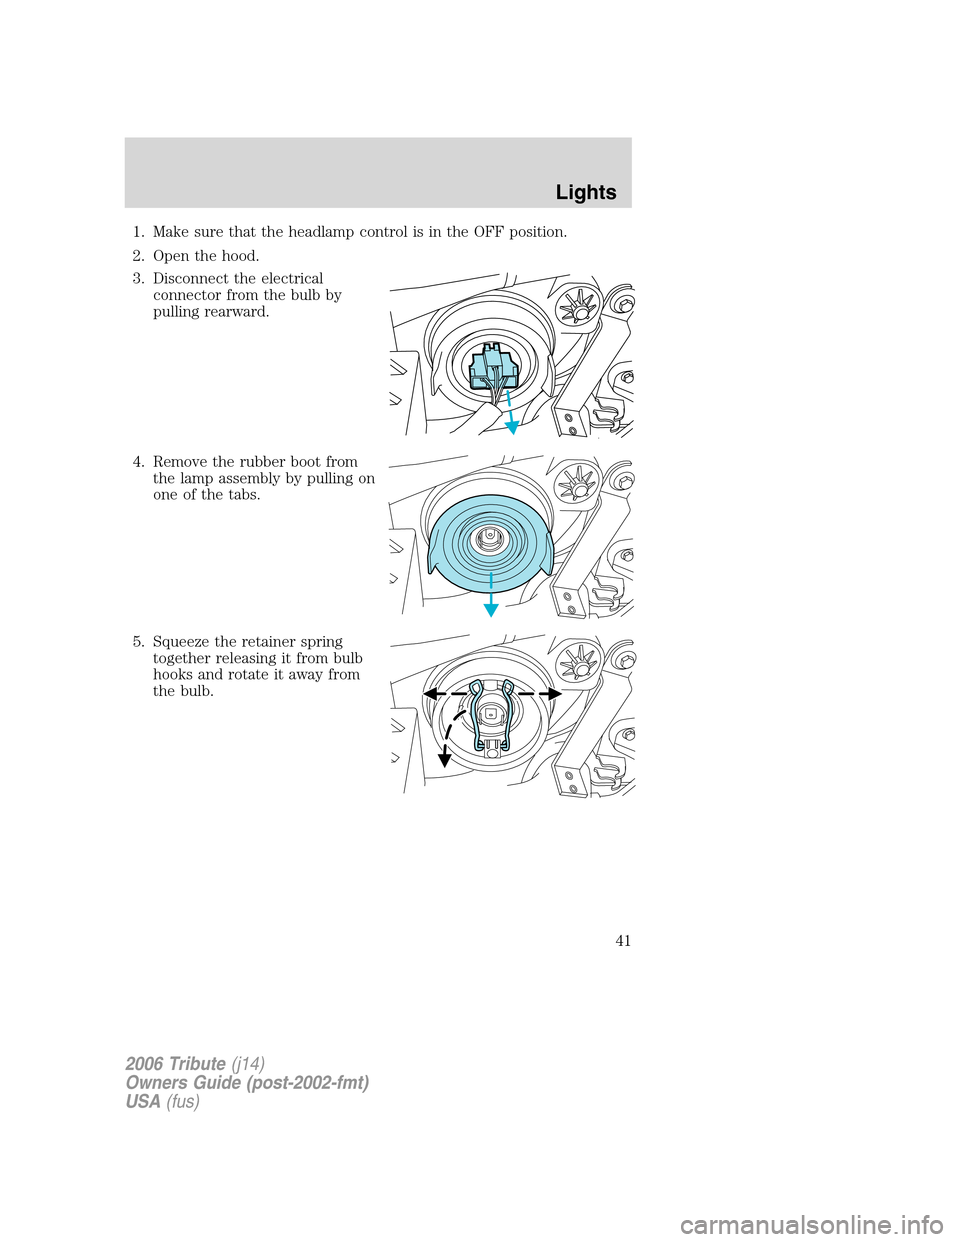 MAZDA MODEL TRIBUTE 2006  Owners Manual (in English) 1. Make sure that the headlamp control is in the OFF position.
2. Open the hood.
3. Disconnect the electrical
connector from the bulb by
pulling rearward.
4. Remove the rubber boot from
the lamp assem